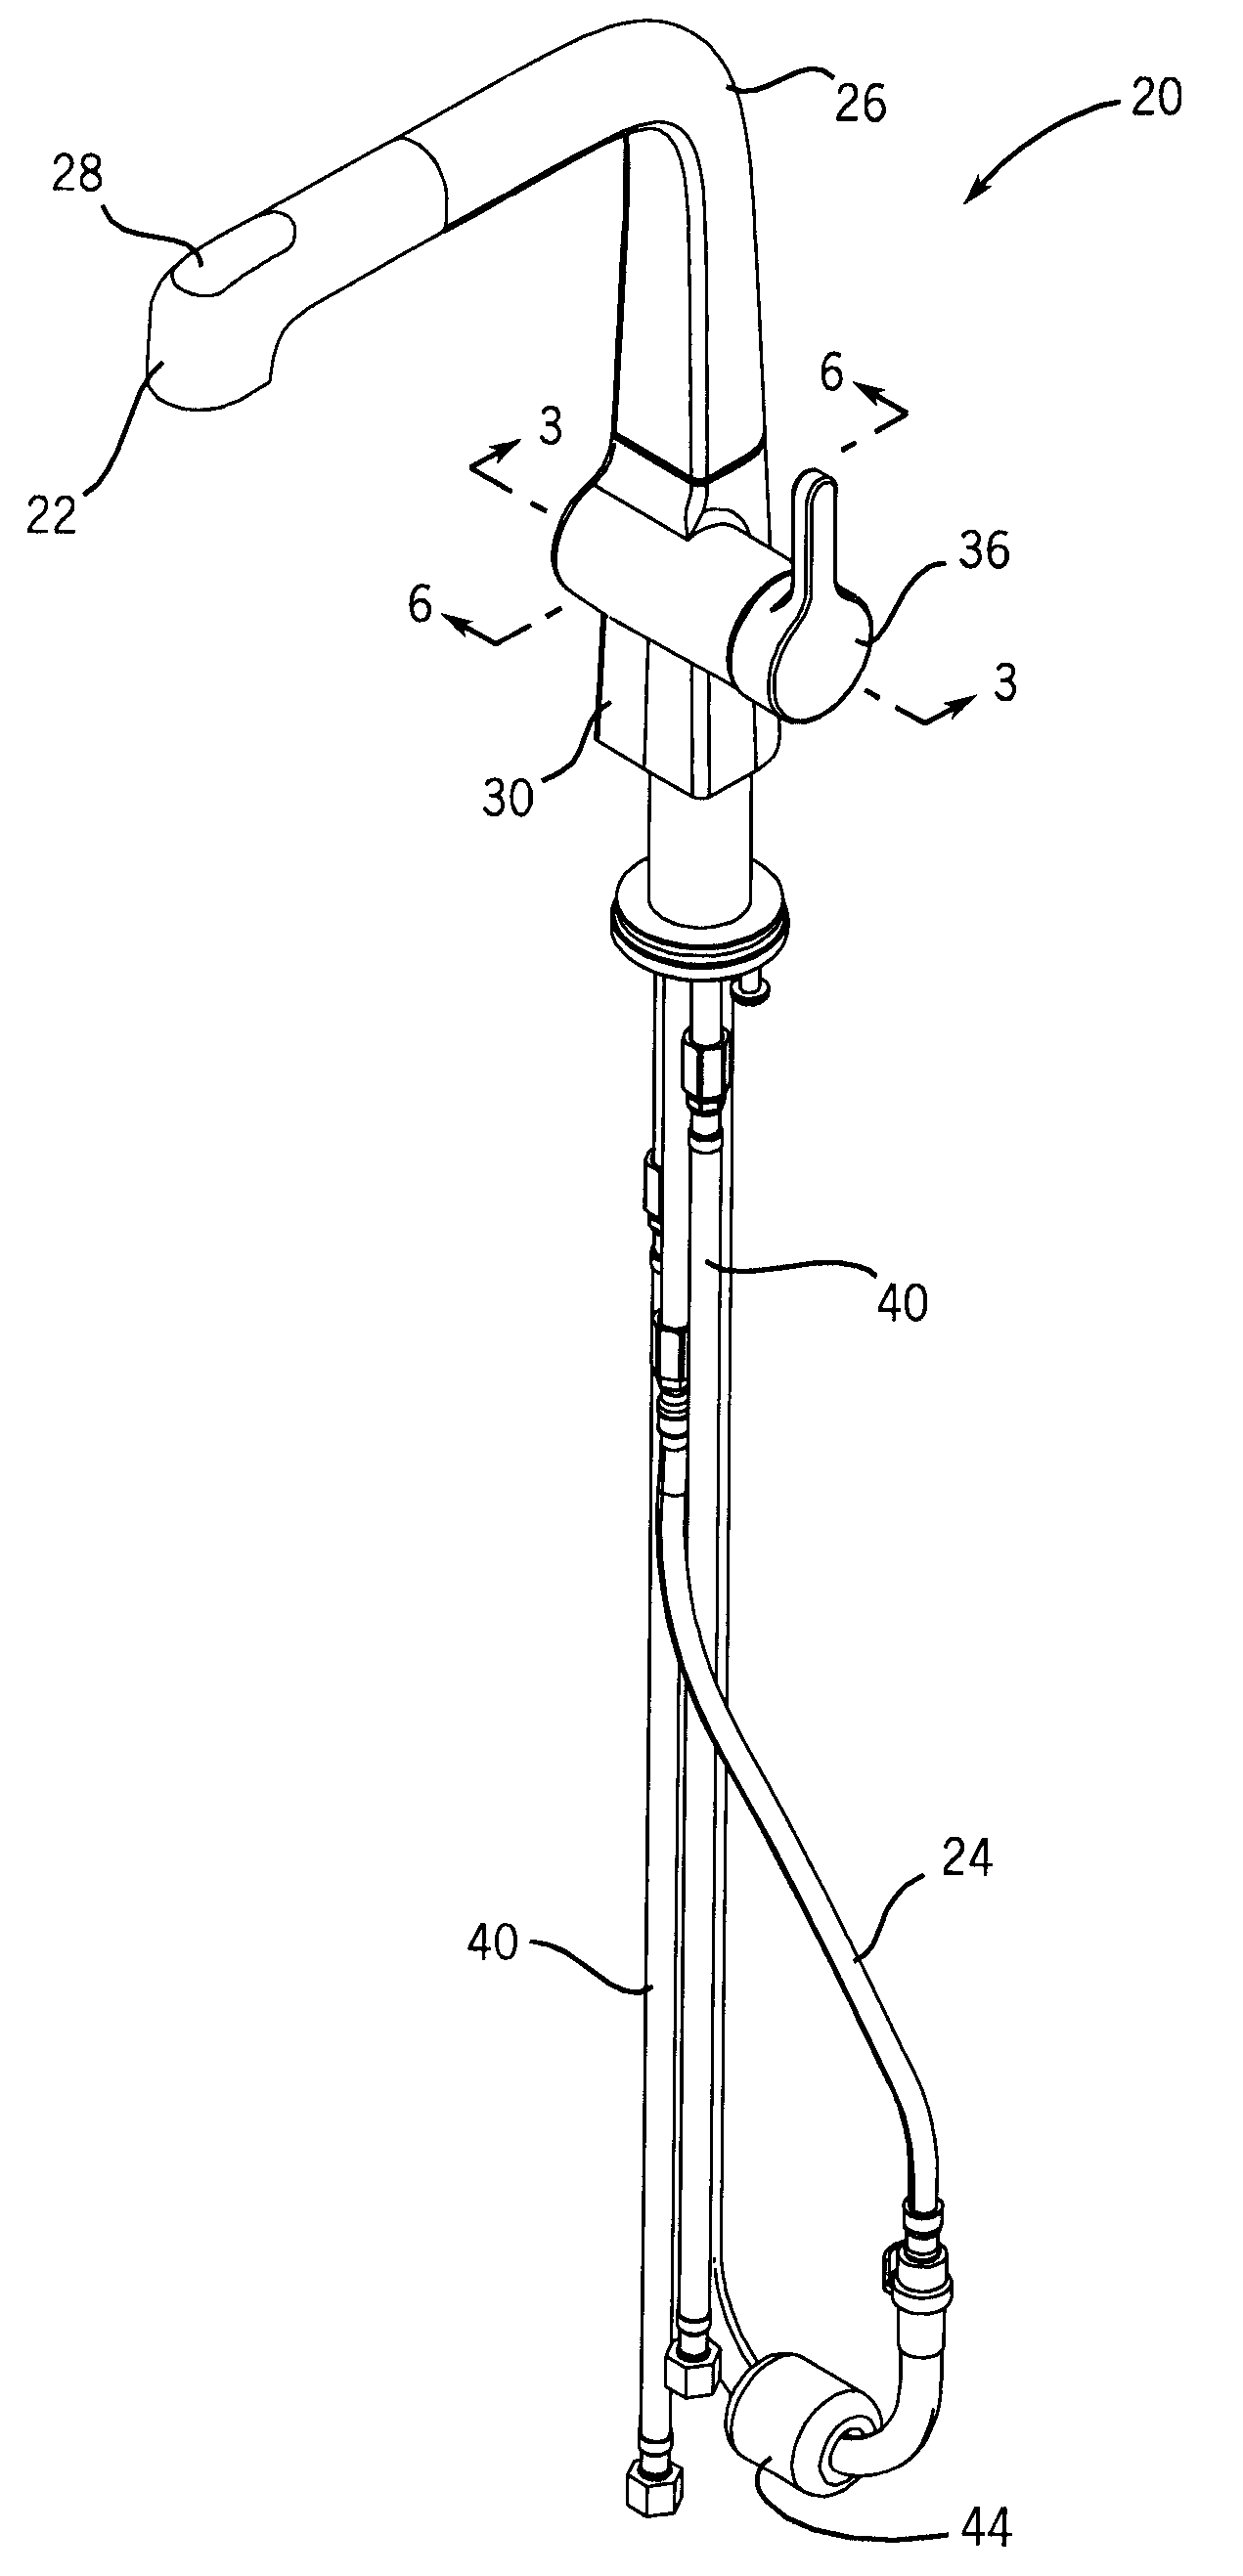 Faucet With Spray Head